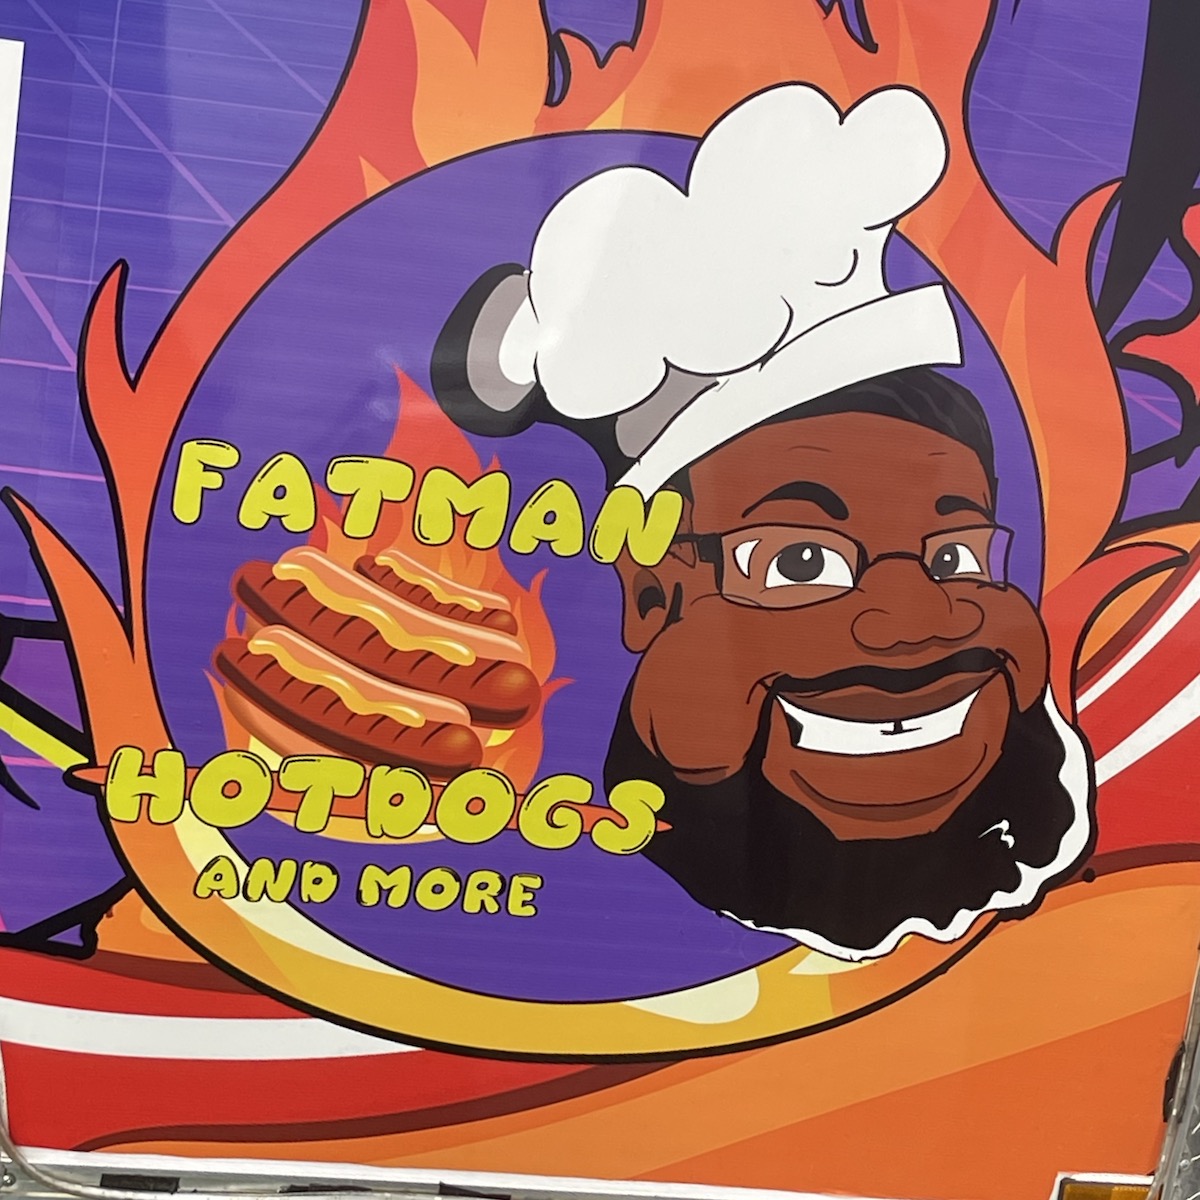 Fatman Hot Dogs and More Food Truck